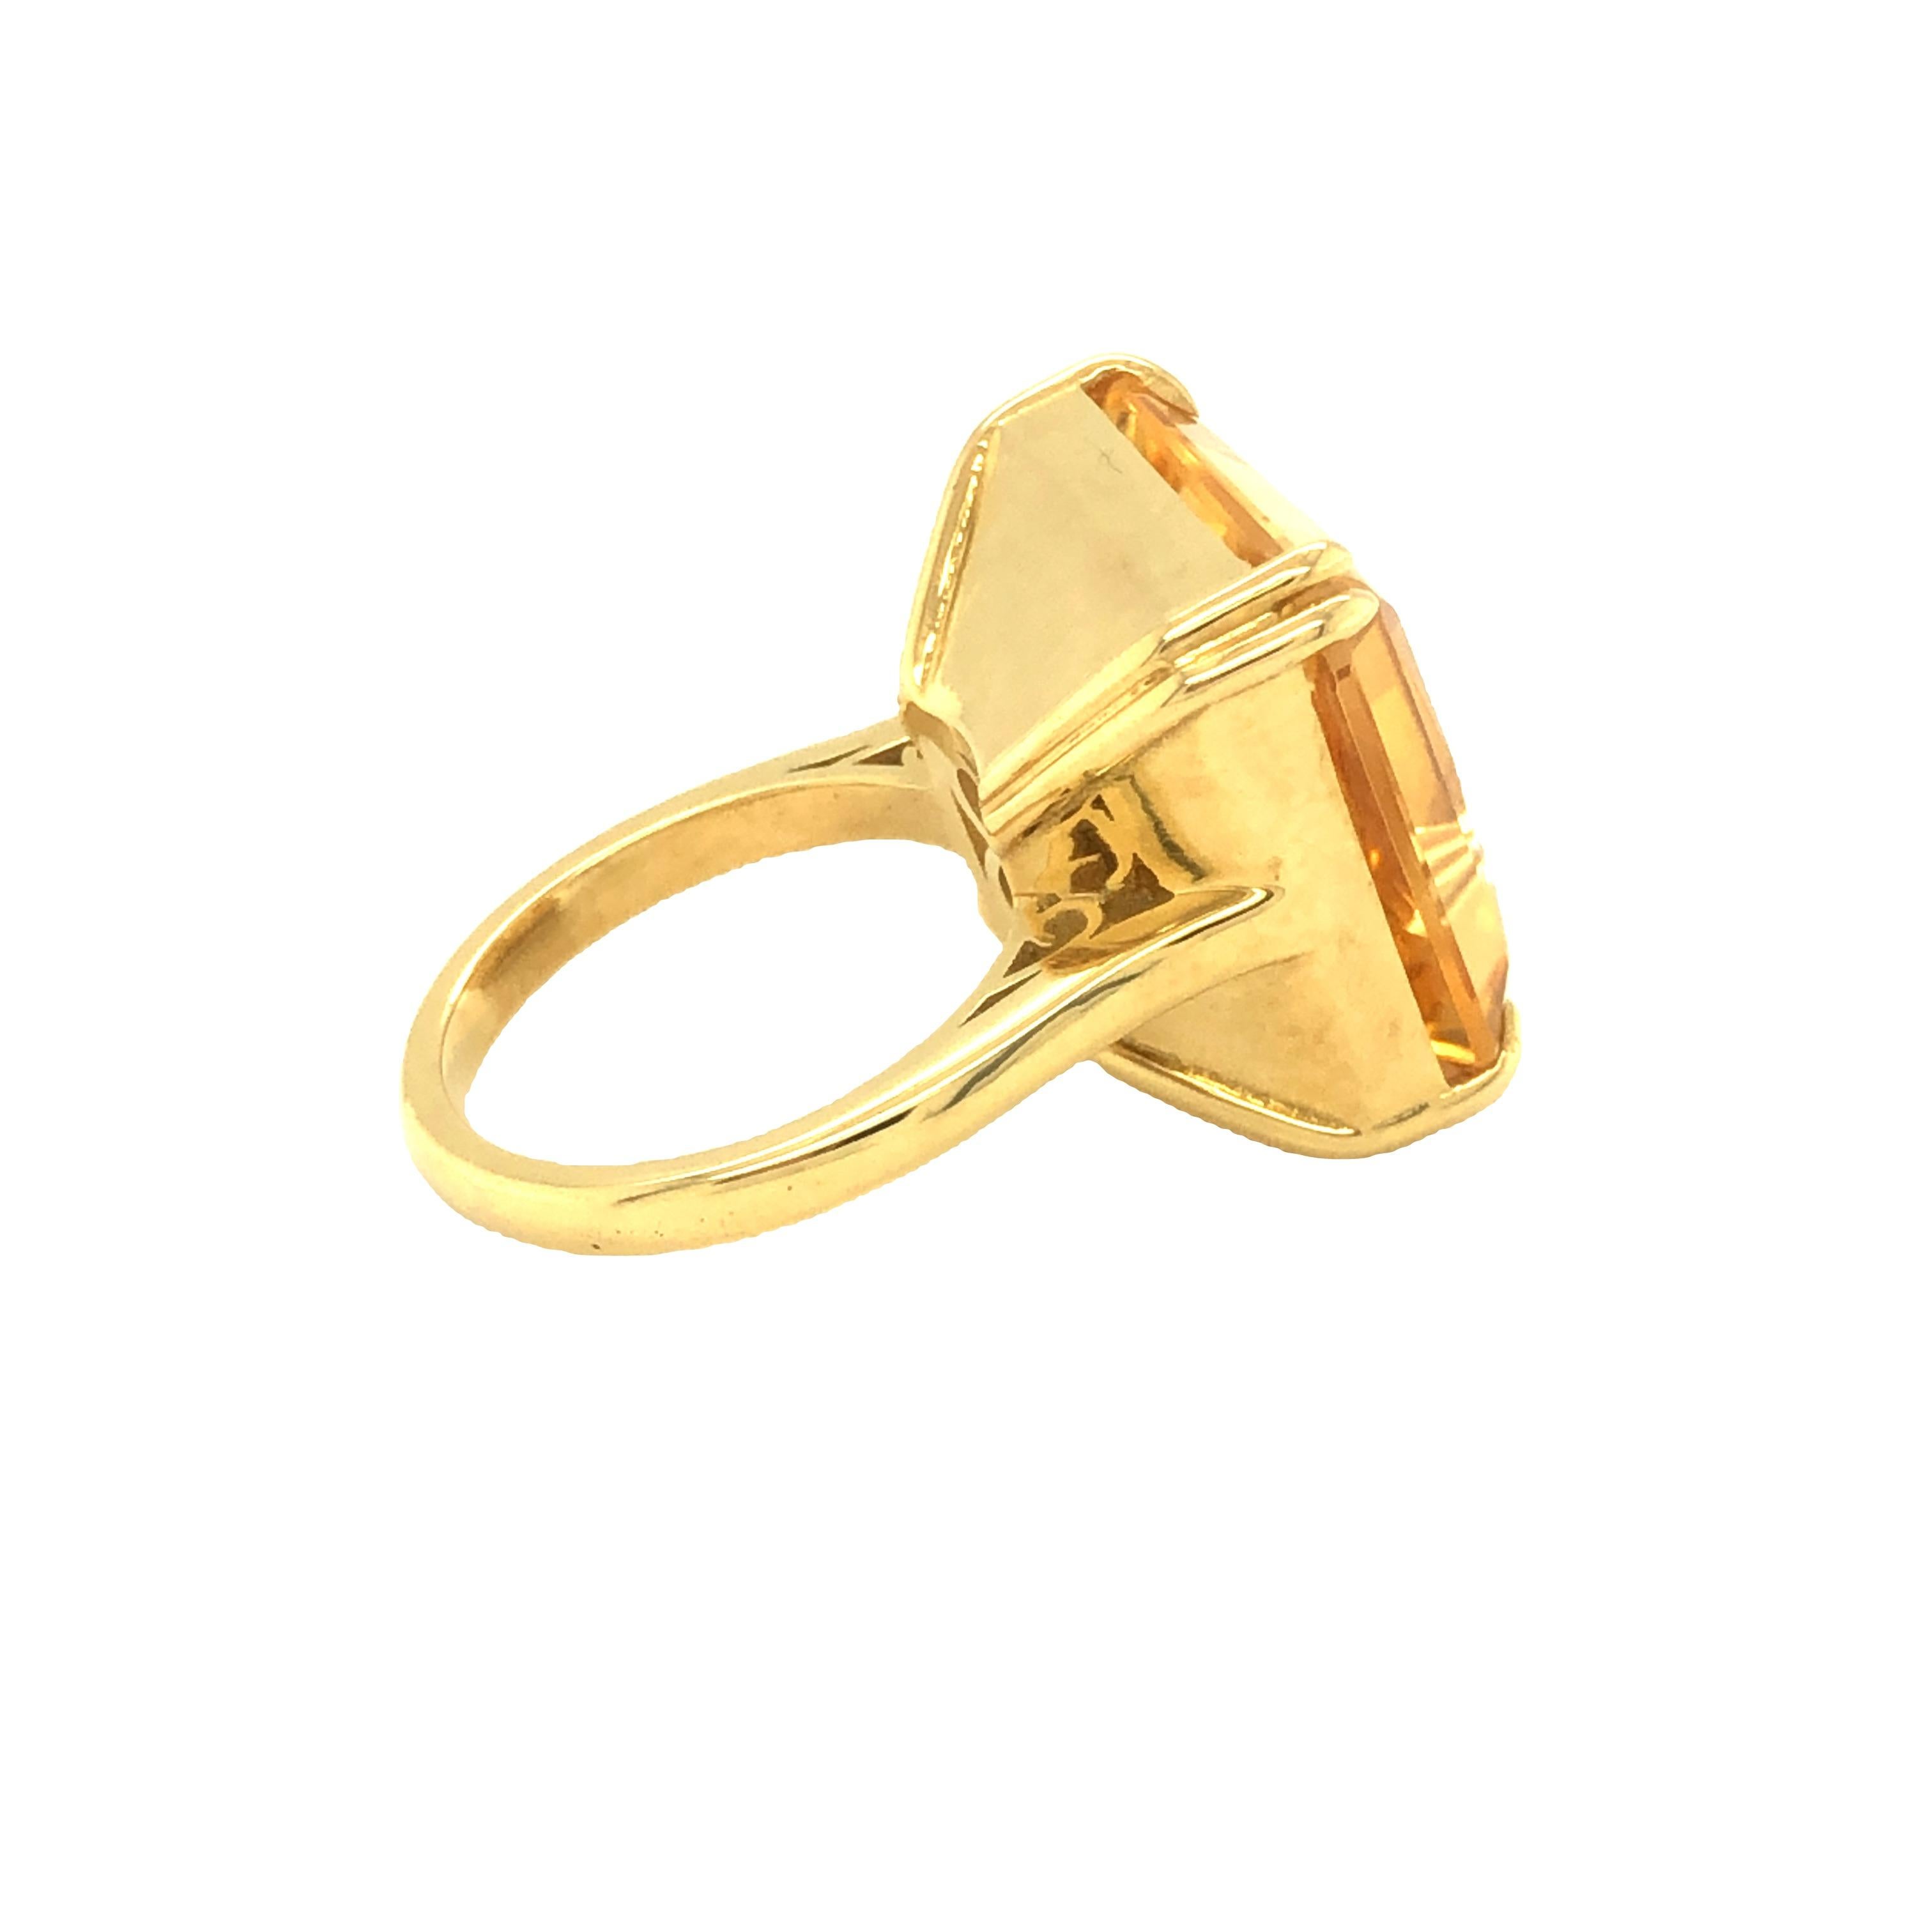 Square Cut Gems Are Forever 13 carat Citrine Solitaire Cocktail Ring 18K Yellow Gold For Sale